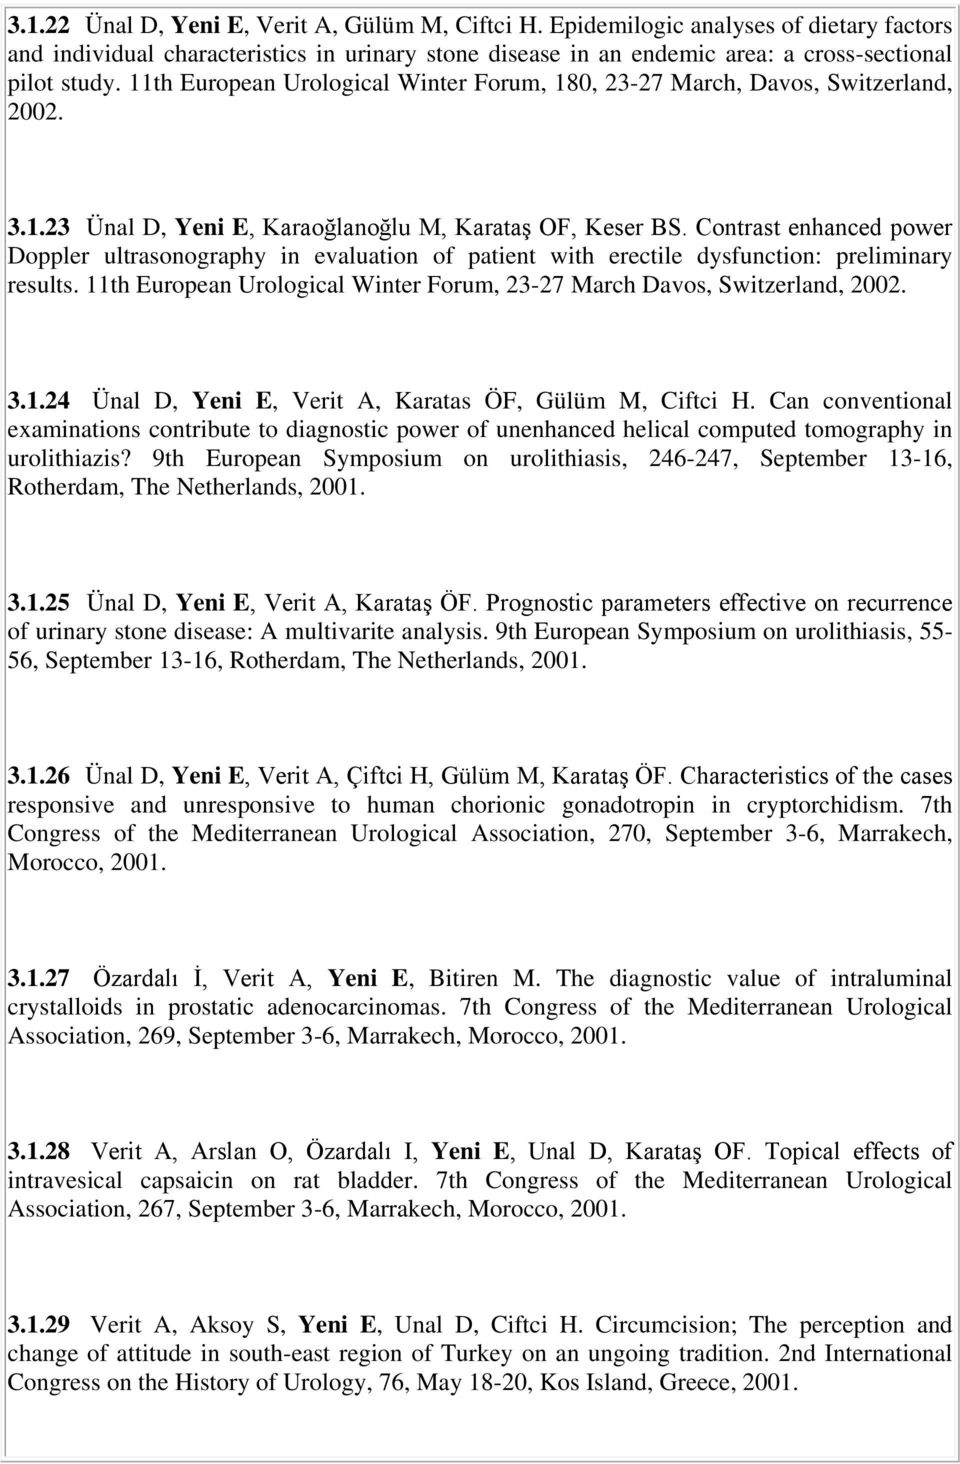 Contrast enhanced power Doppler ultrasonography in evaluation of patient with erectile dysfunction: preliminary results. 11th European Urological Winter Forum, 23-27 March Davos, Switzerland, 2002. 3.